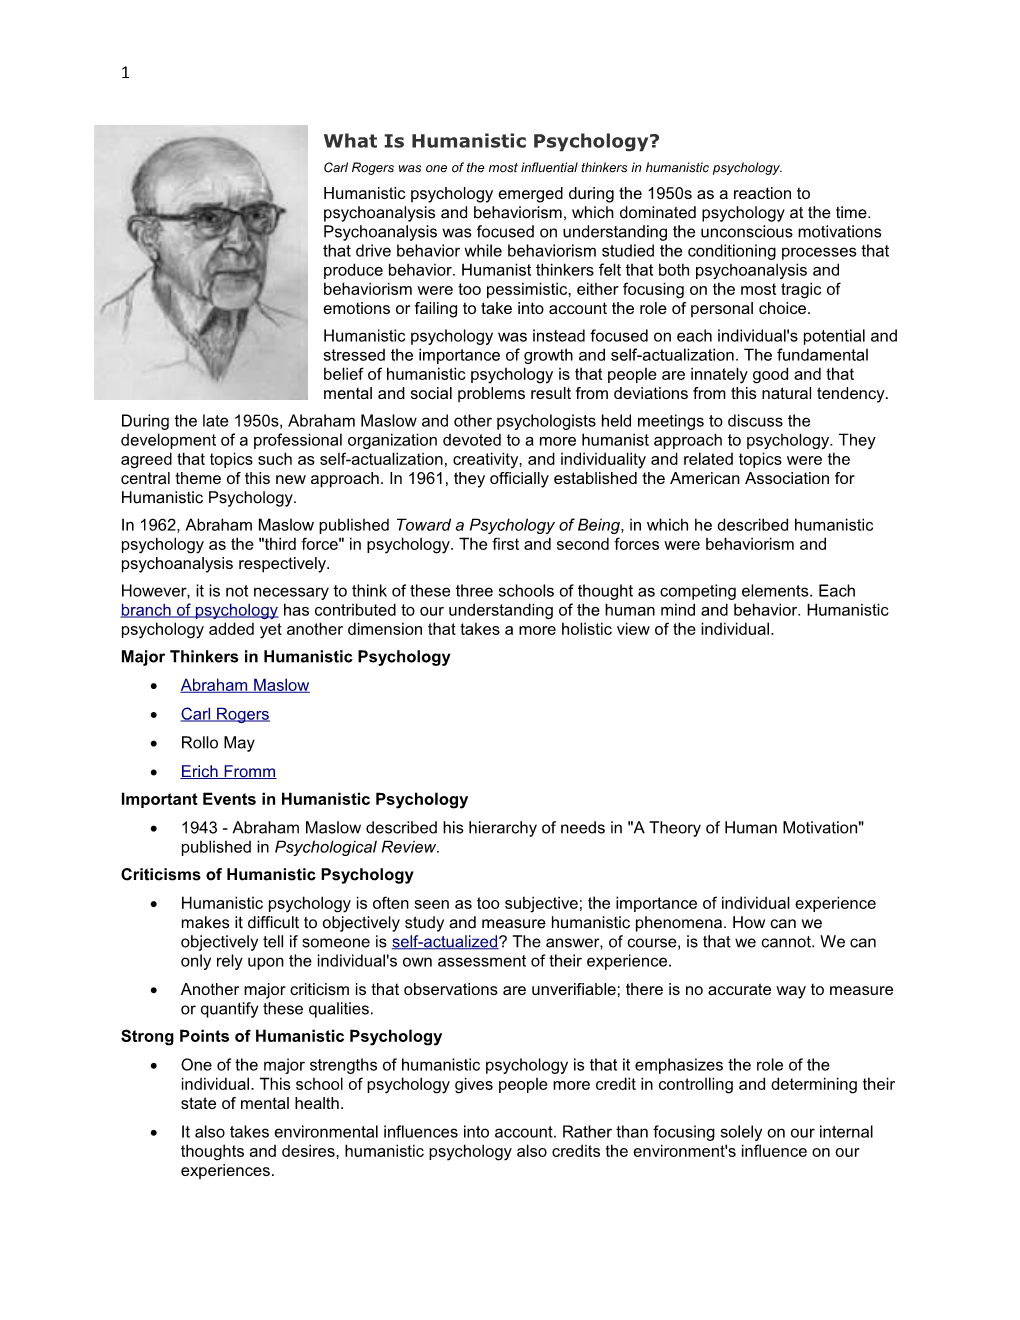 Carl Rogers Was One of the Most Influential Thinkers in Humanistic Psychology